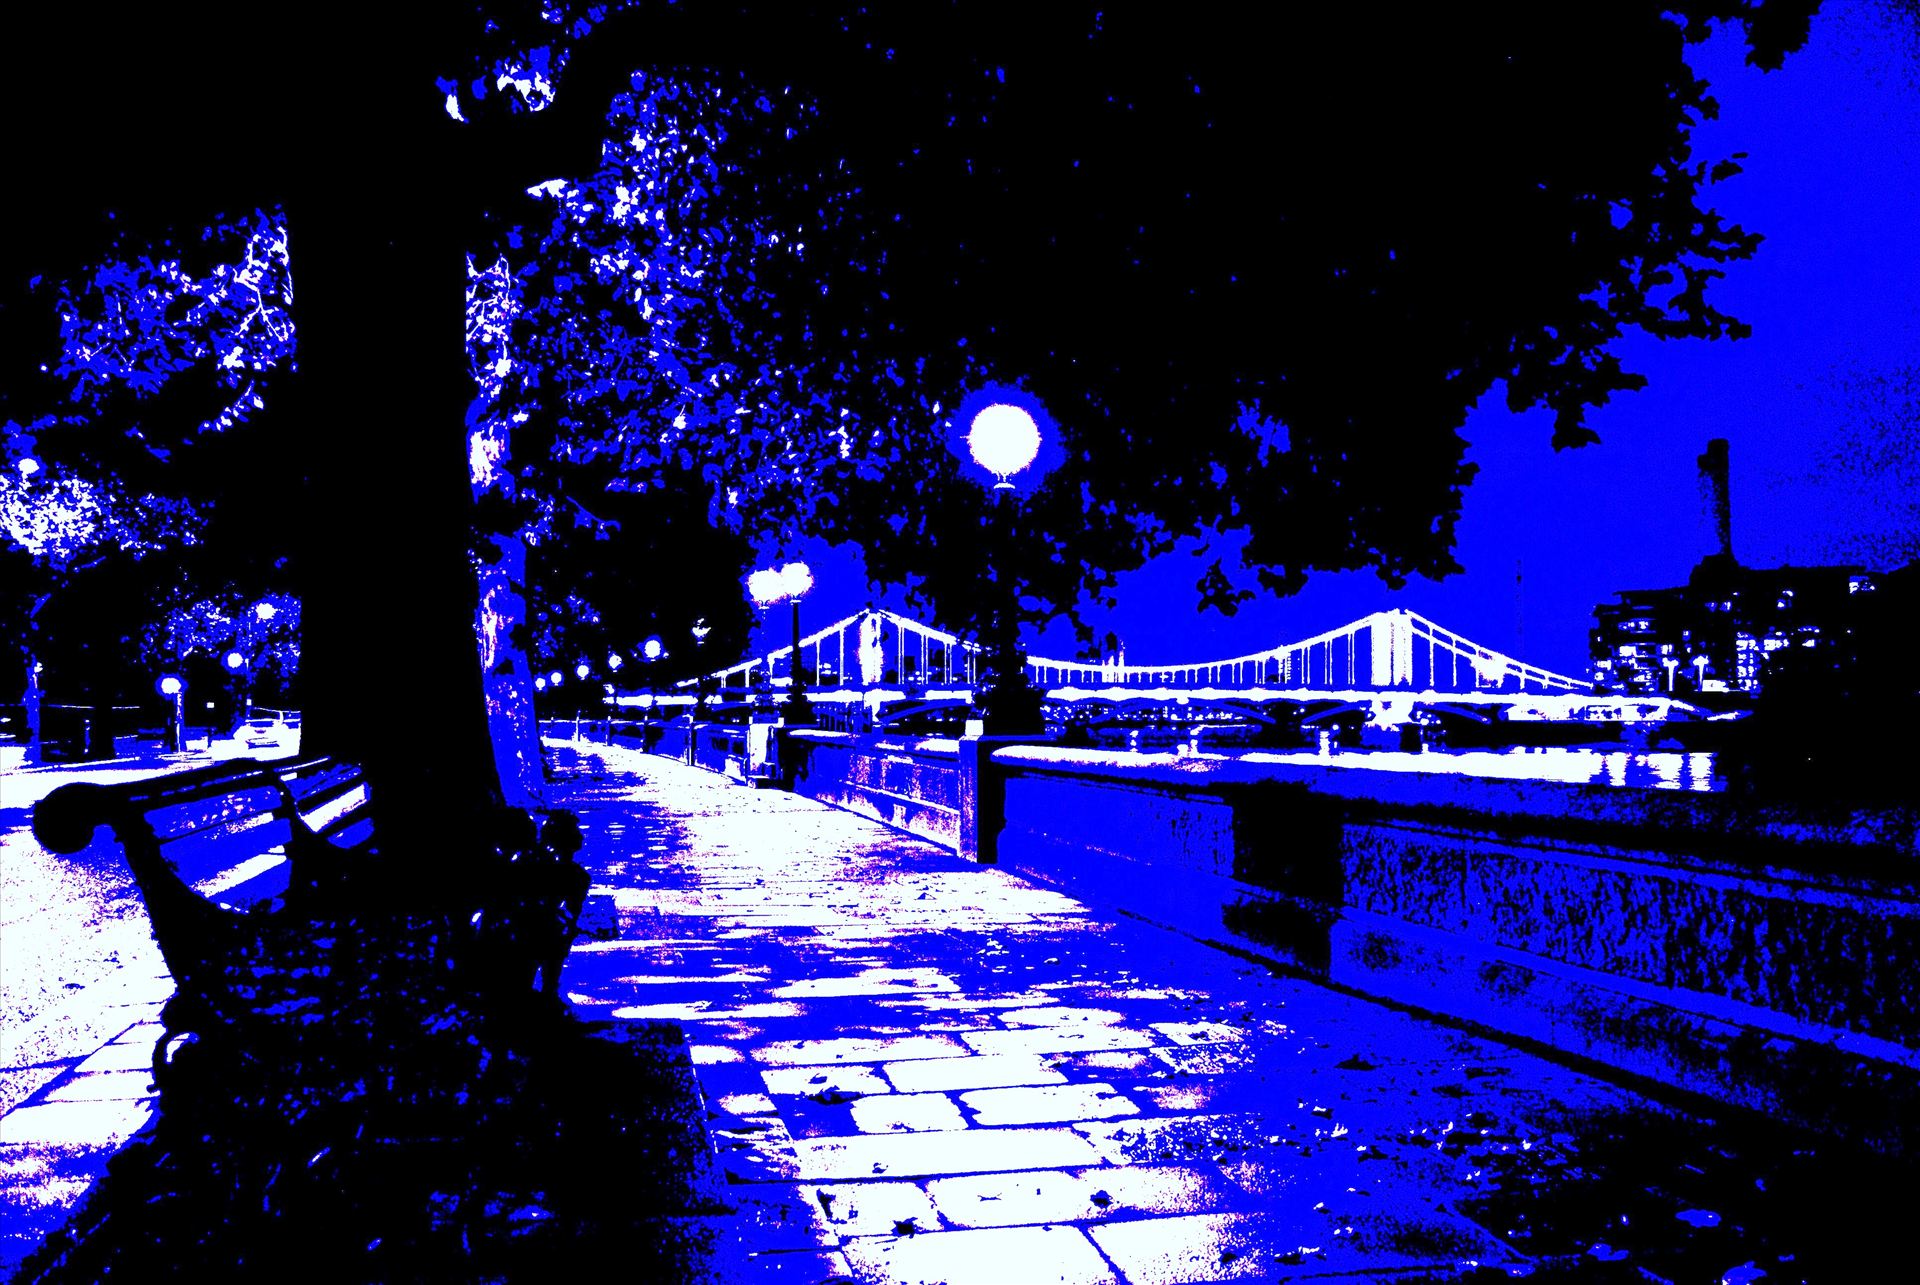 London Embankment 2 - Romantic Photo of London by PopArtMediaProductions